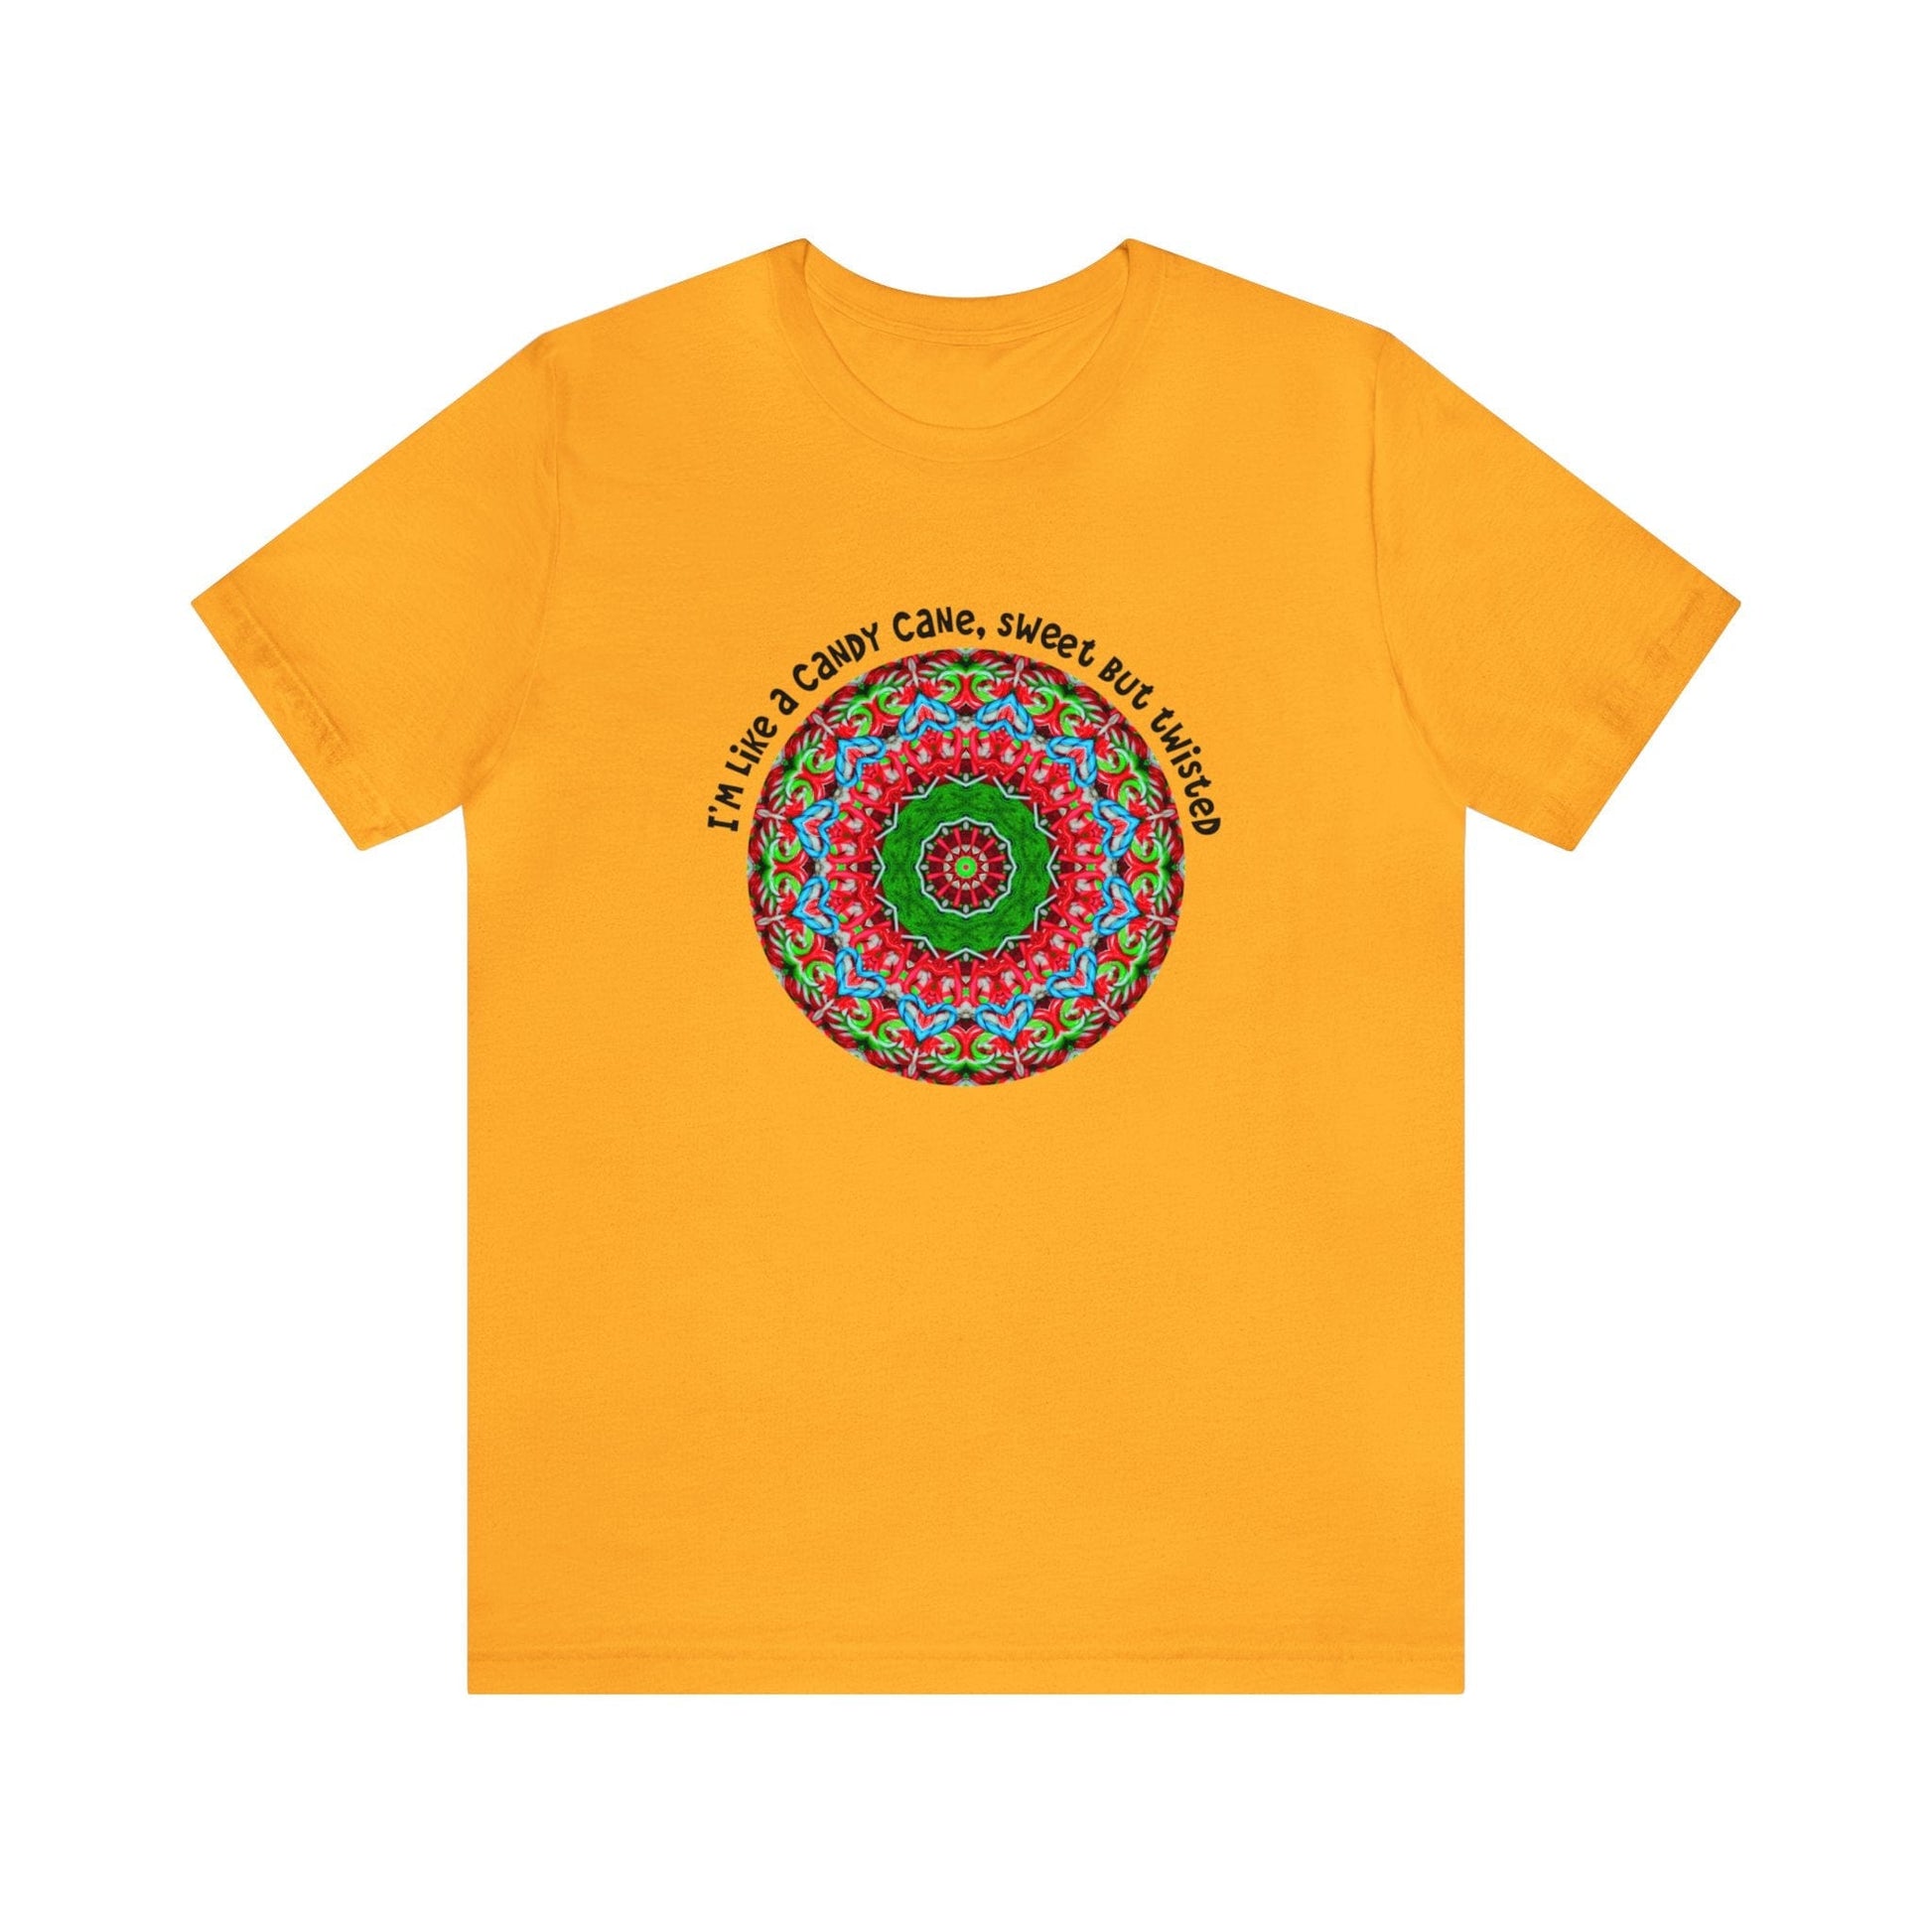 Sarcastic Funny Christmas Shirt - All Day Graphic TShirts, Im like a candy cane cute but twisted Candy Cane Mandala Gold